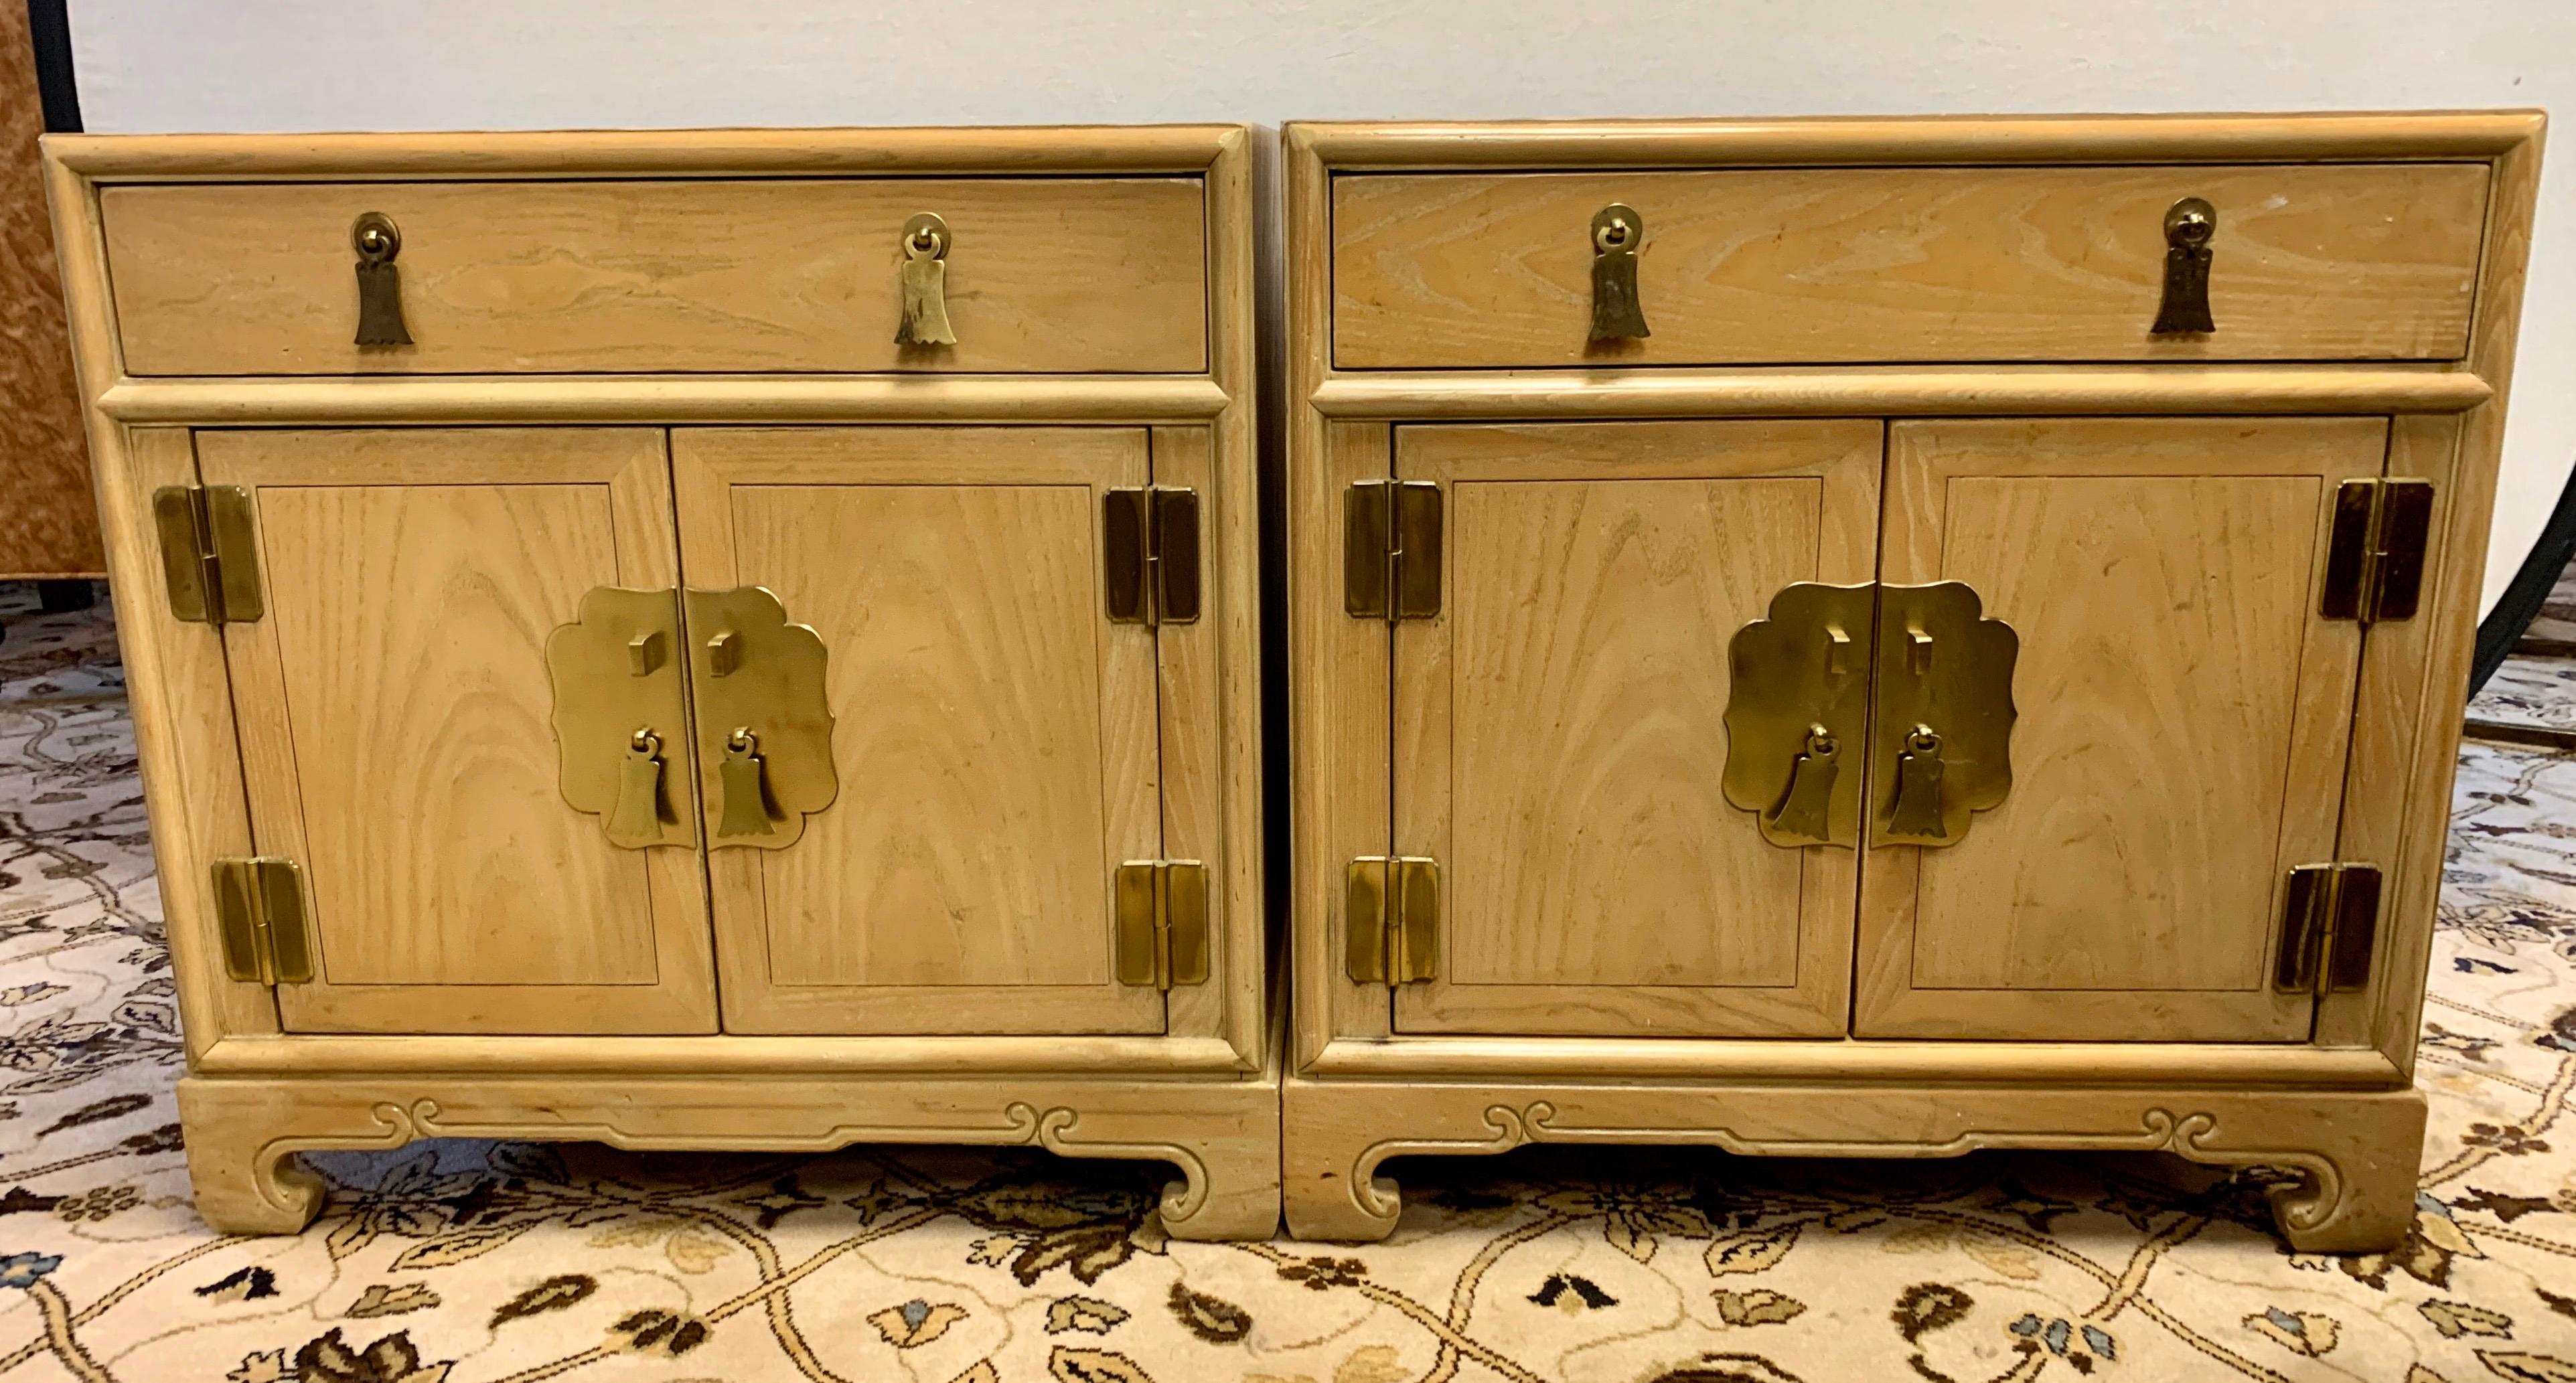 A gorgeous matching pair of nightstands by Ray Sabota for Century Furniture Company, circa 1970s. Brass hardware and lovely motifs accent the pieces. Excellent vintage condition. Retains the maker mark and Sabota label as well.